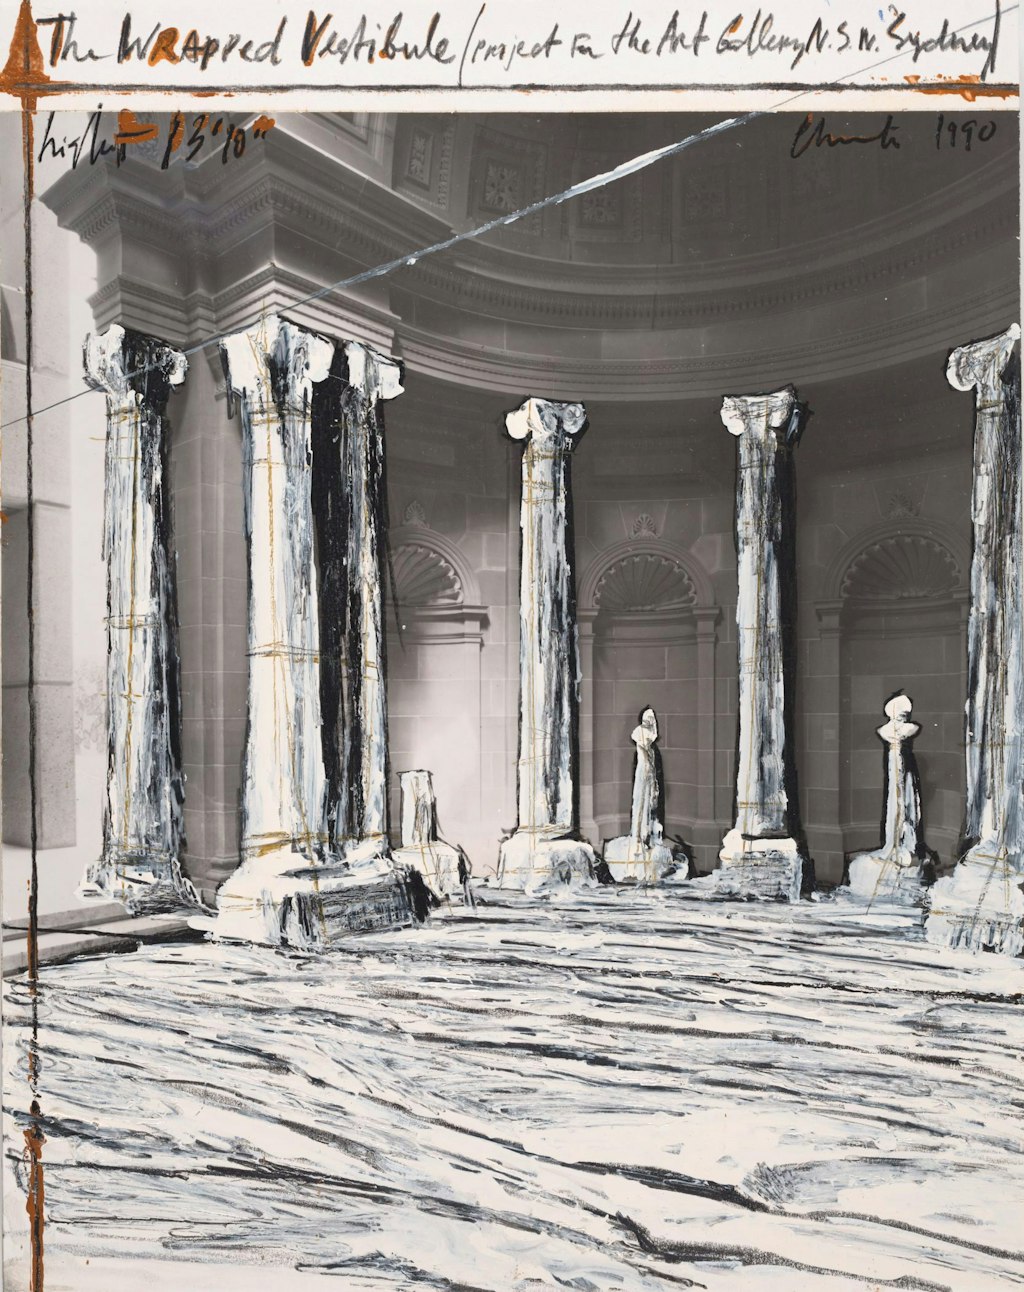 A black-and-white photograph of a vestibule has been drawn over so that fabric covers the columns and floor. Across the top is written 'The Wrapped Vestibule (concept for the Art Gallery NSW Sydney) height 13'10" Christo 1990